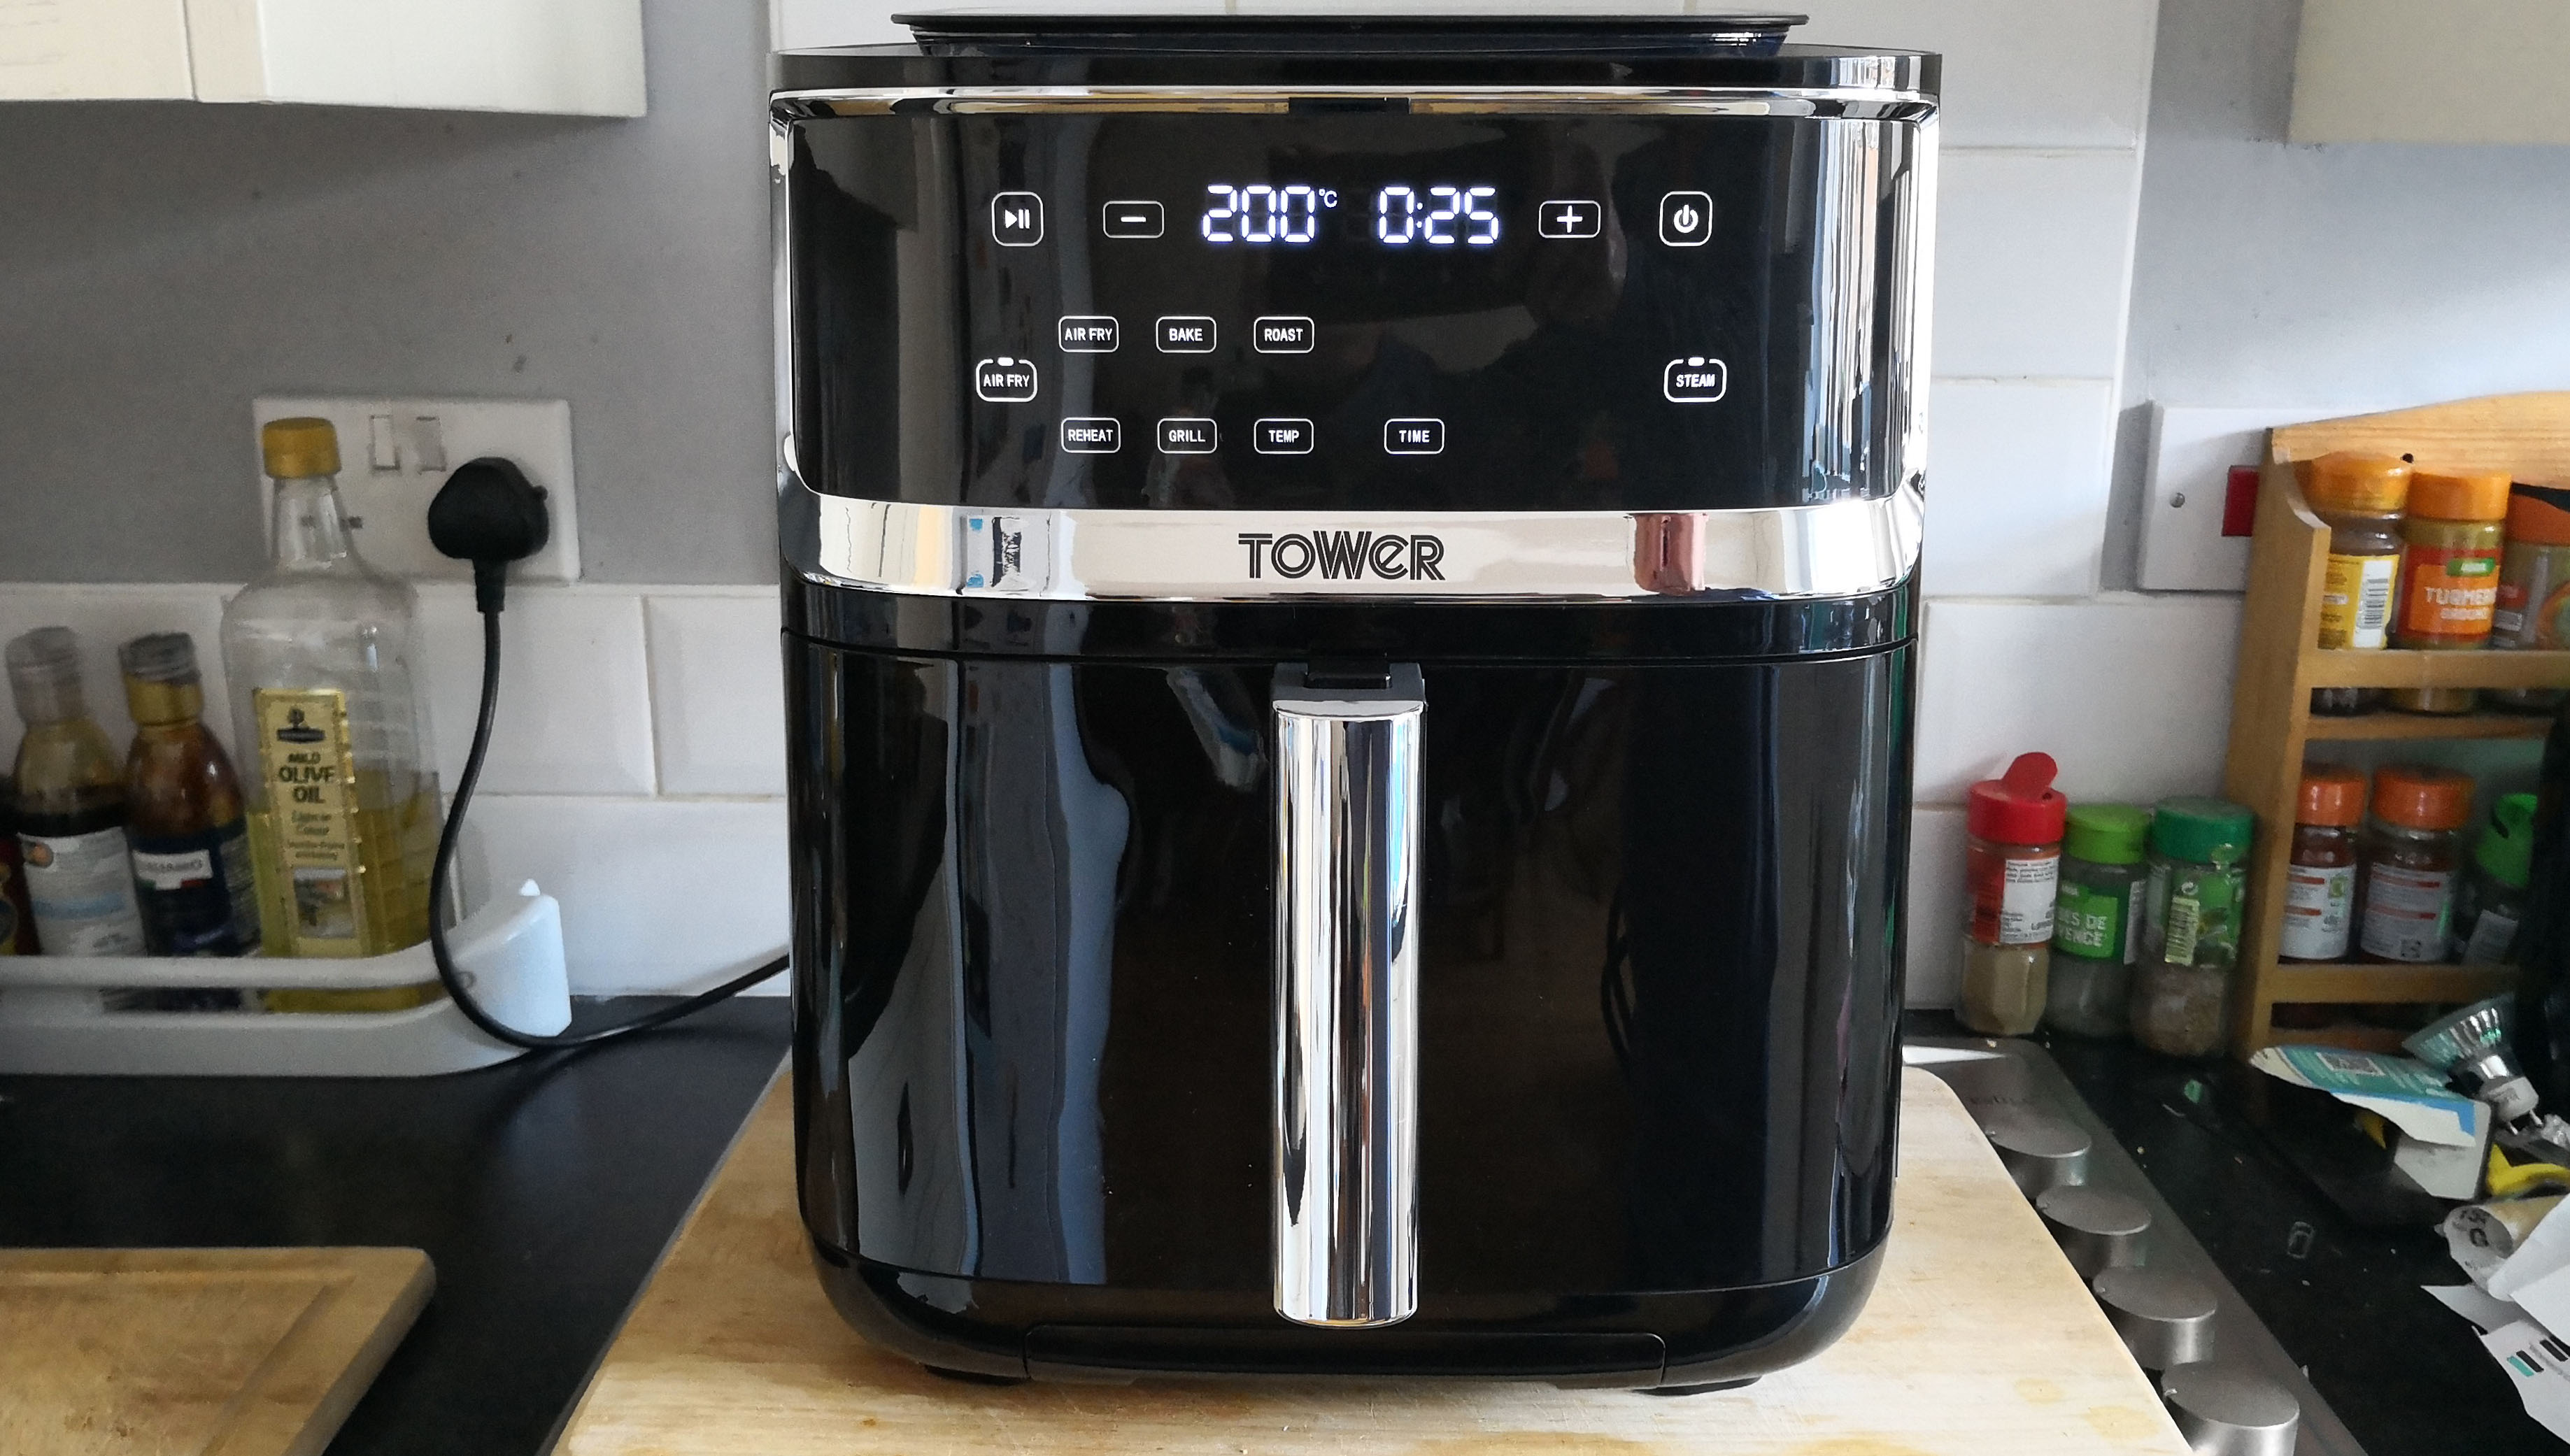 Tower Vortex 7-in-1 Air Fryer with Steamer review: combi-steam